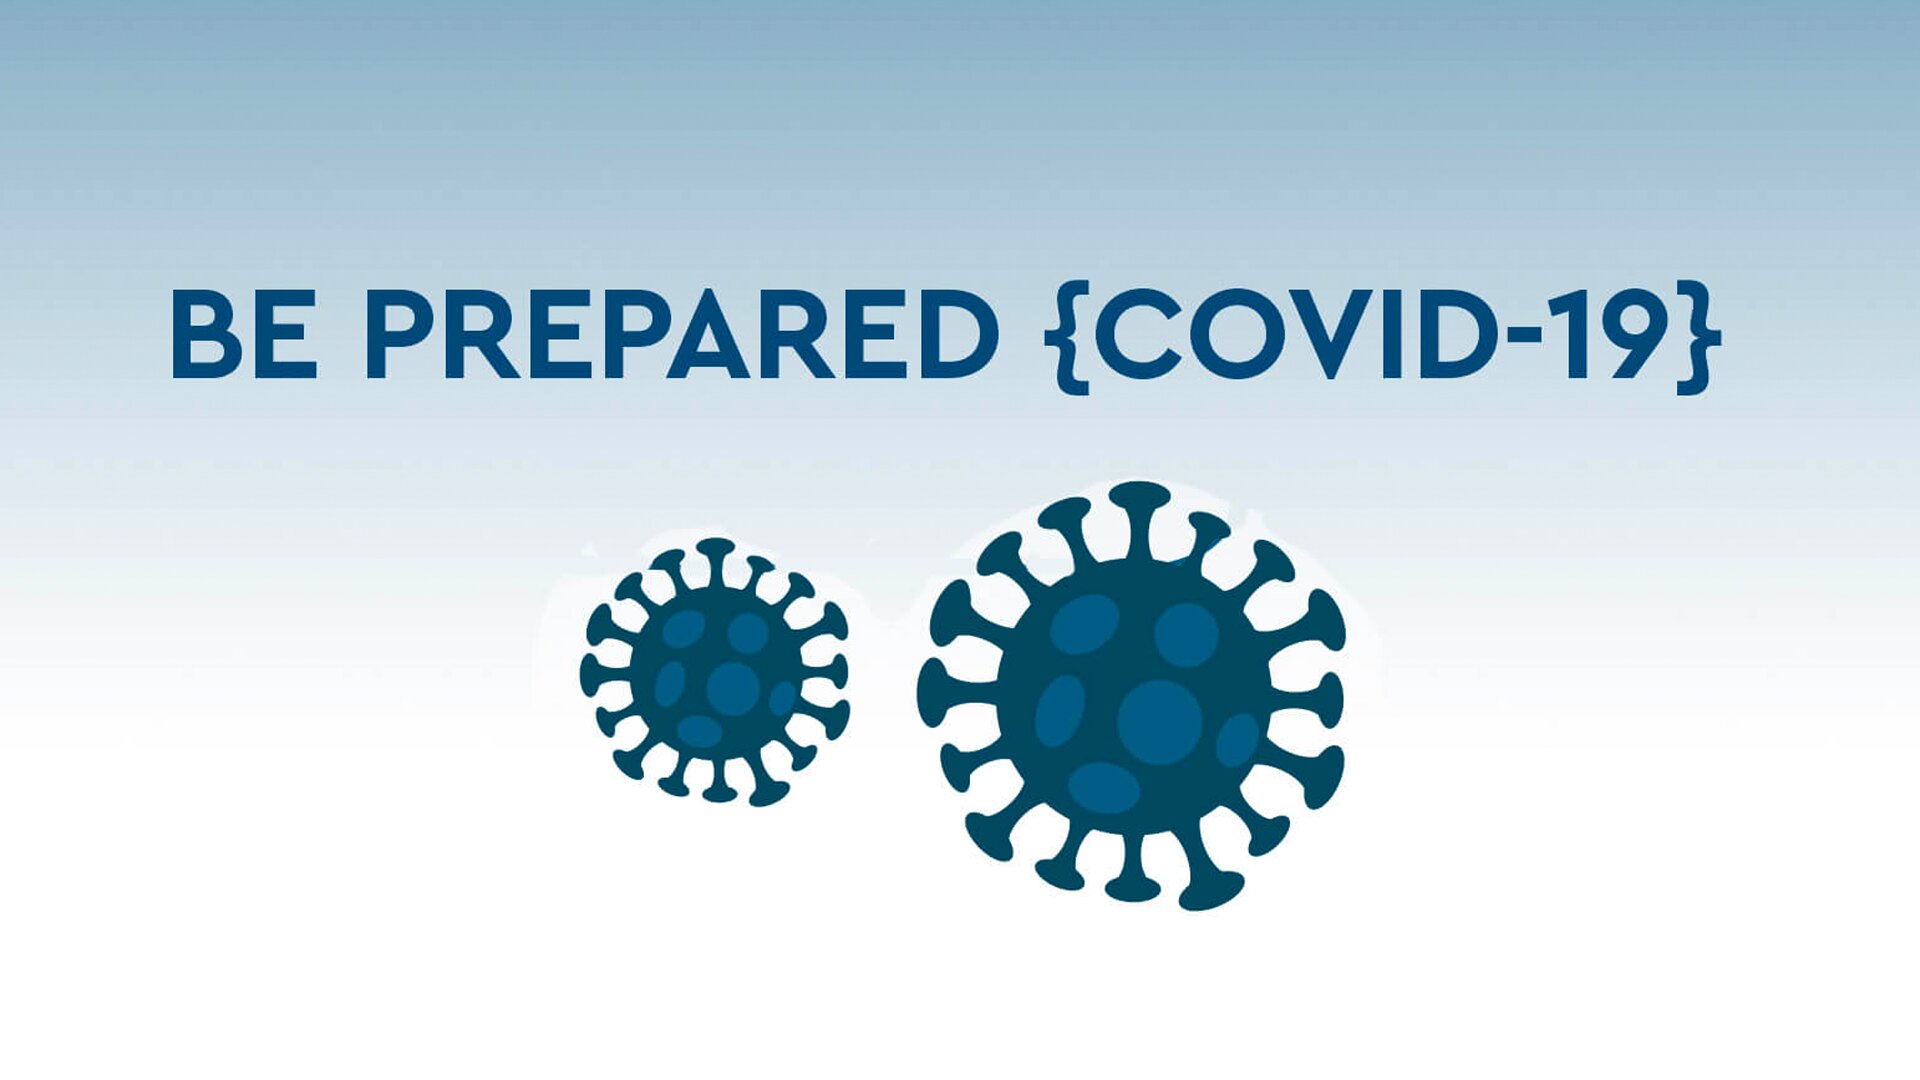 Be prepared and stay safe during COVID-19